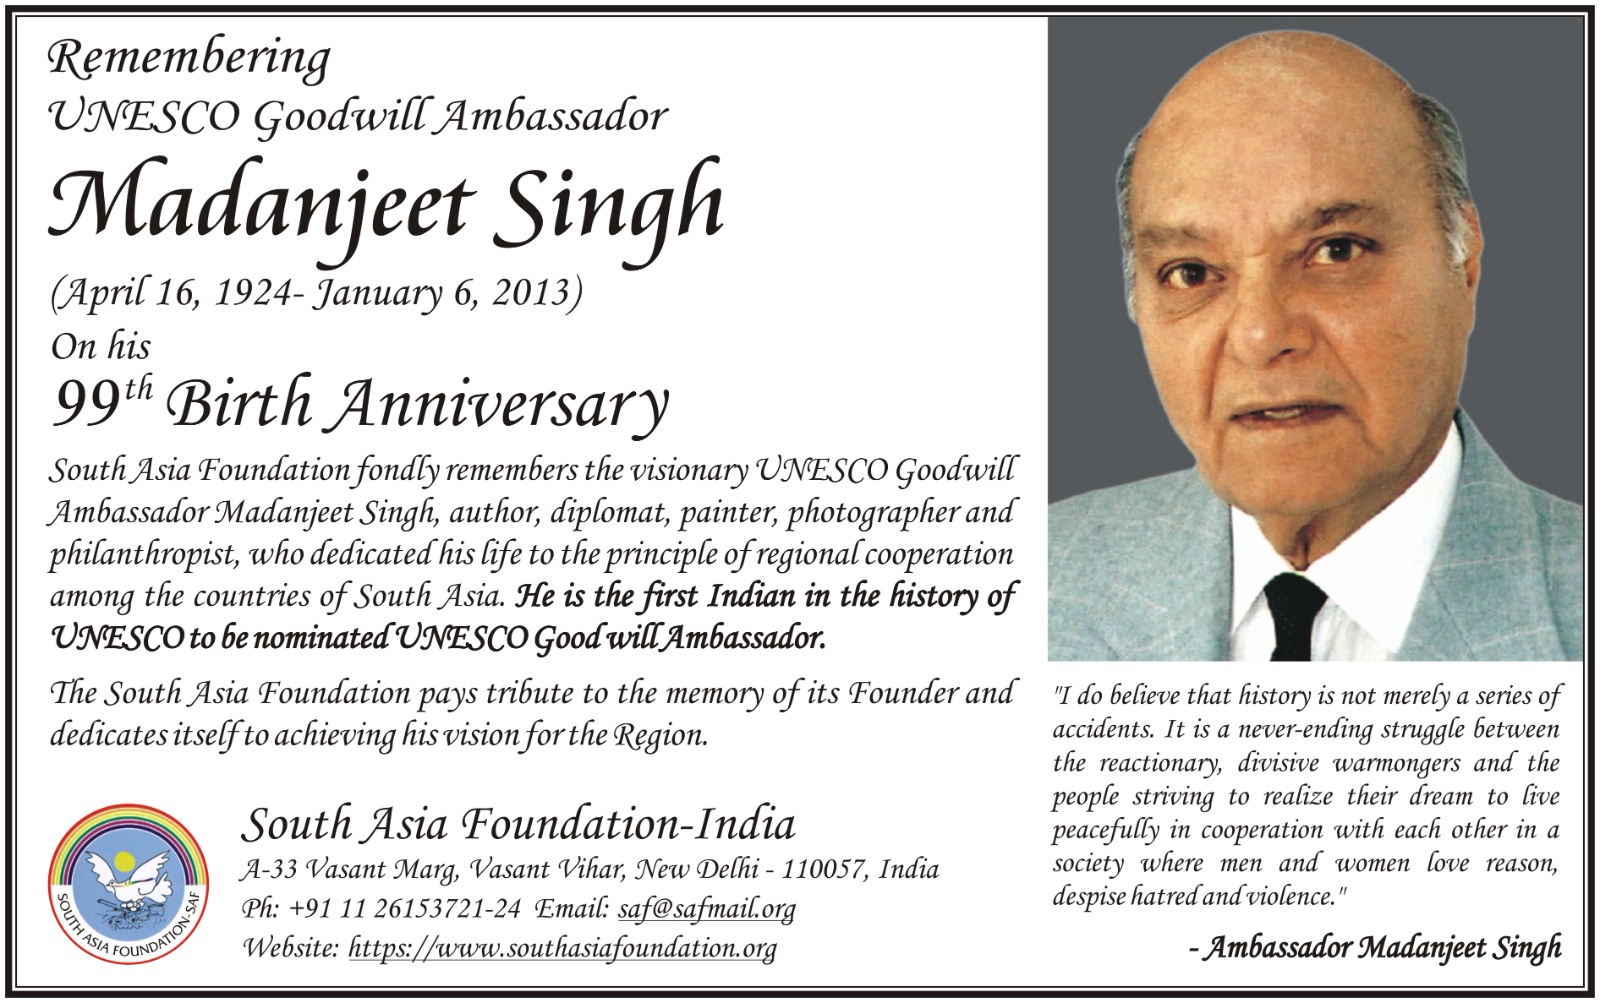 The South Asia Foundation pays tribute to the memory of its Founder UNESCO Goodwill Ambassador Madanjeet Singh